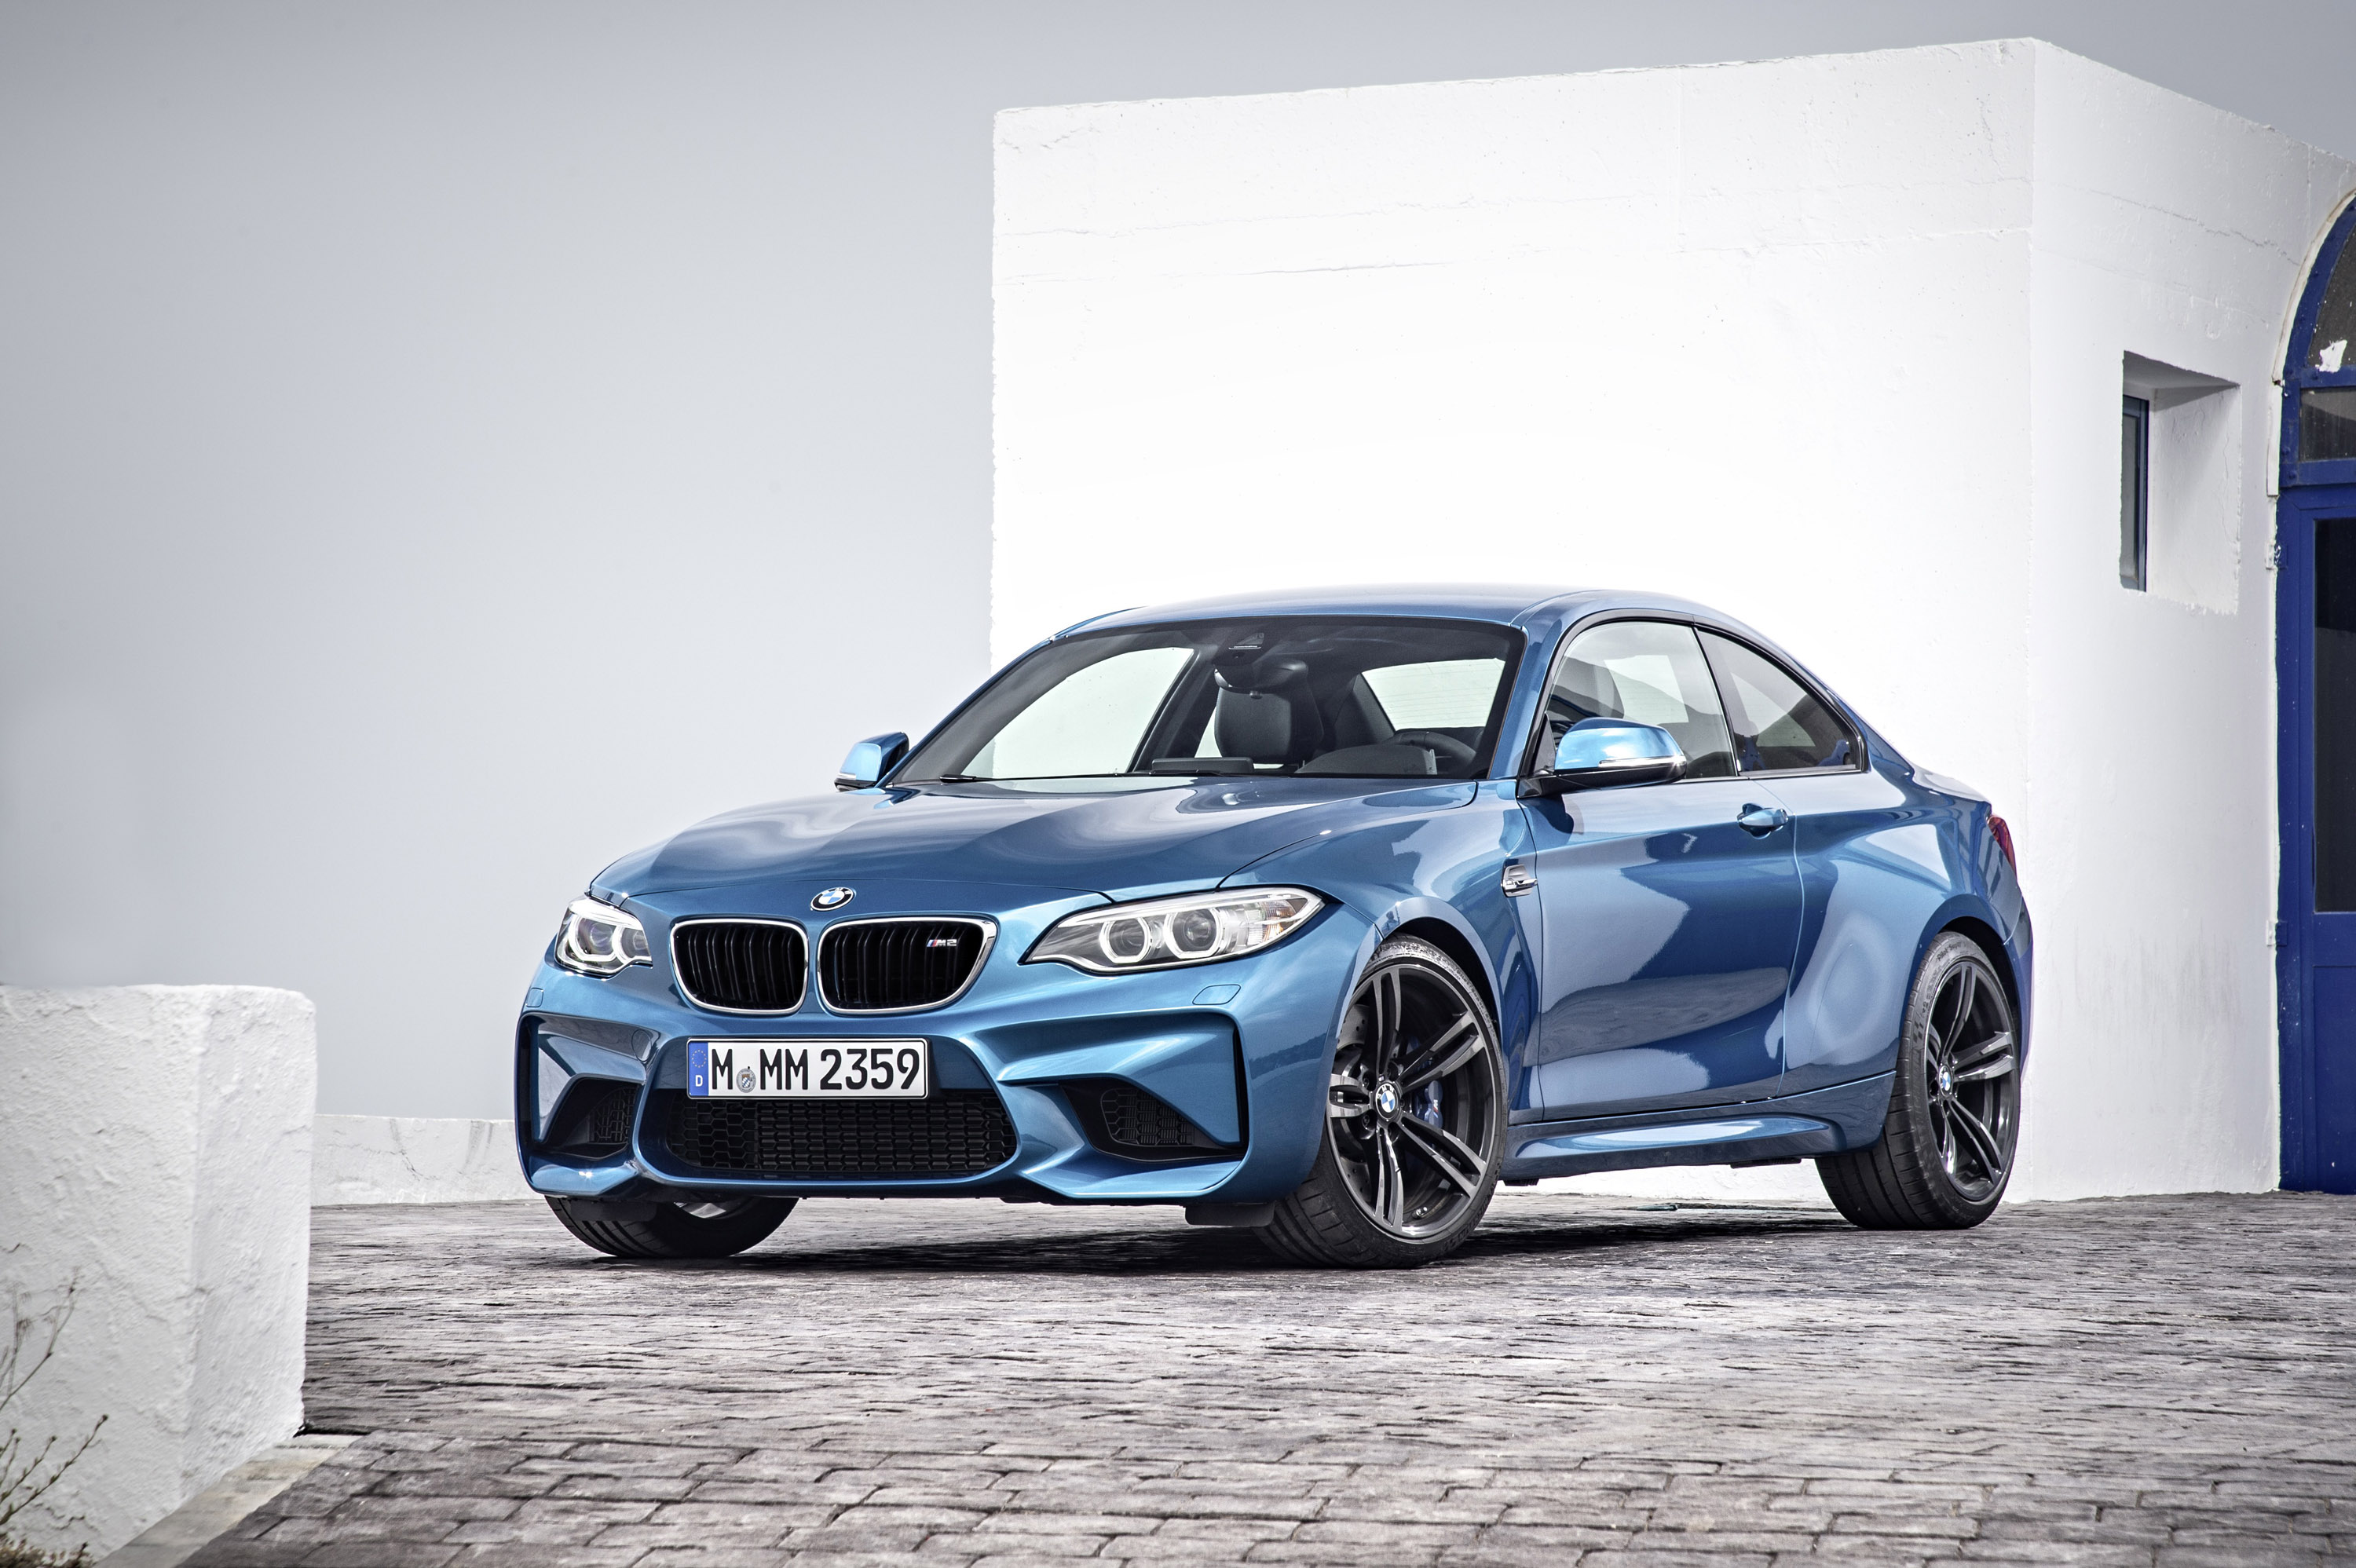 Bmw m2 2016 review